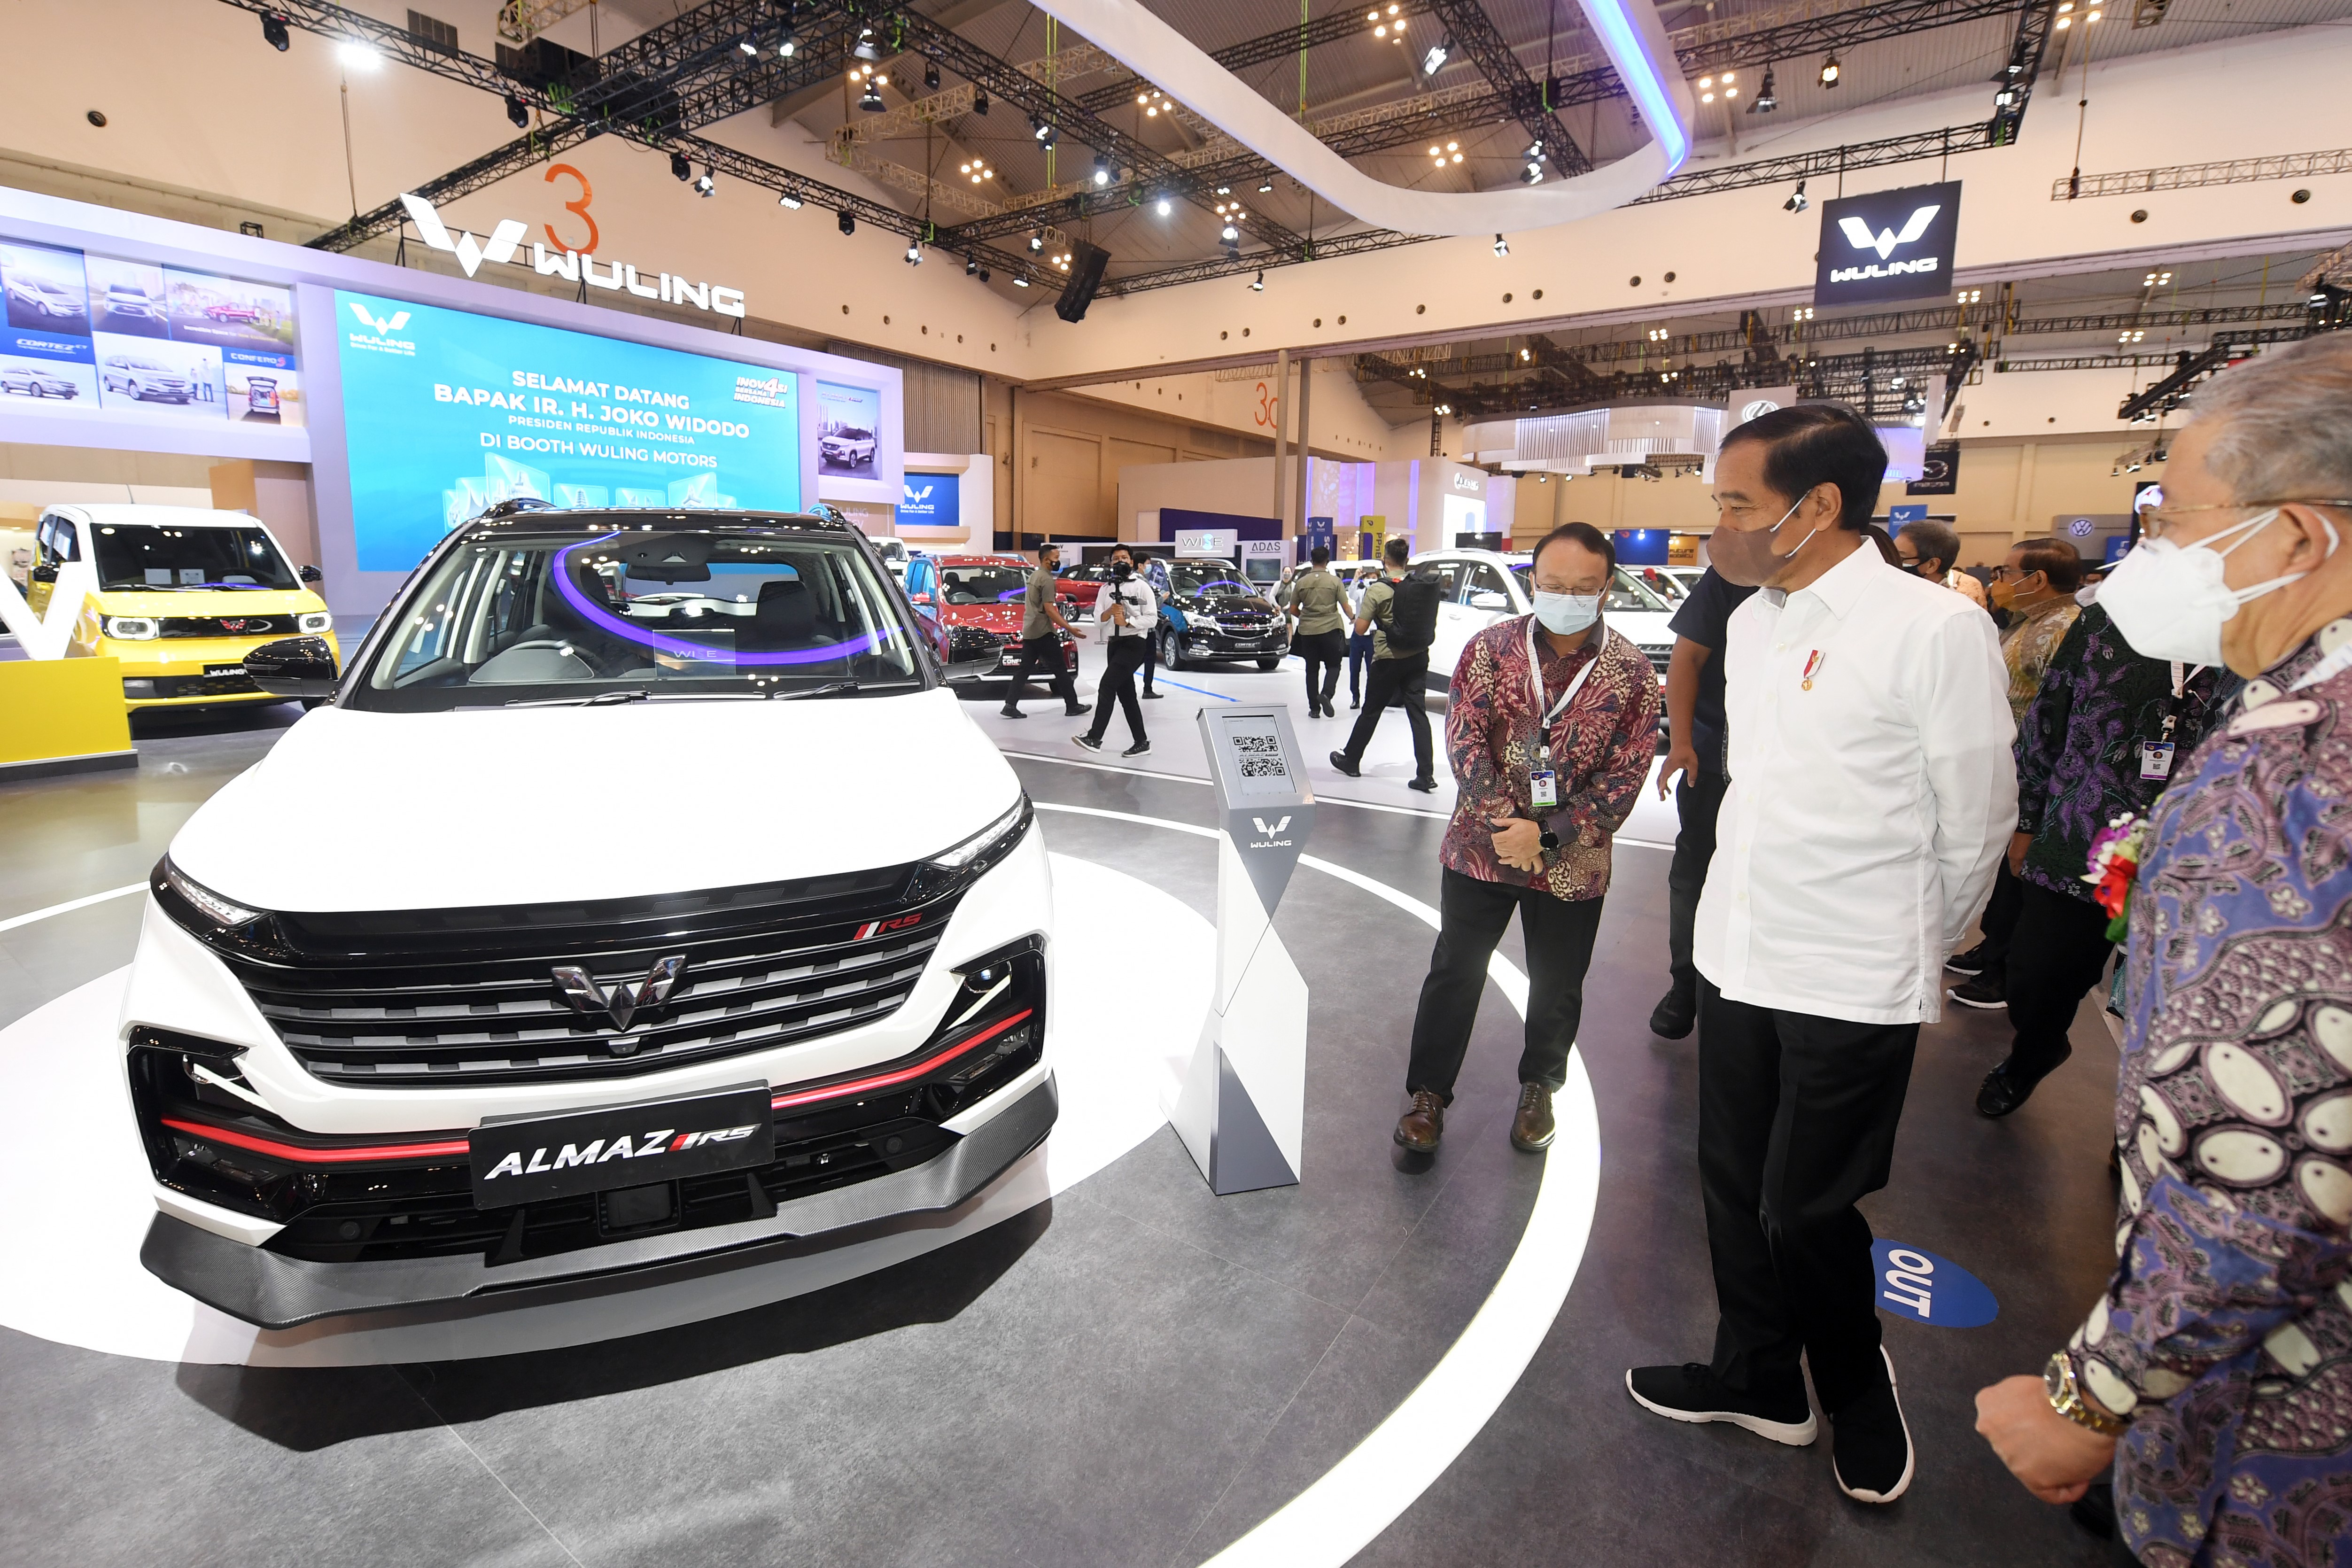 Image The President of Republic of Indonesia Visits the Wuling Motors’ Booth at GIIAS 2021